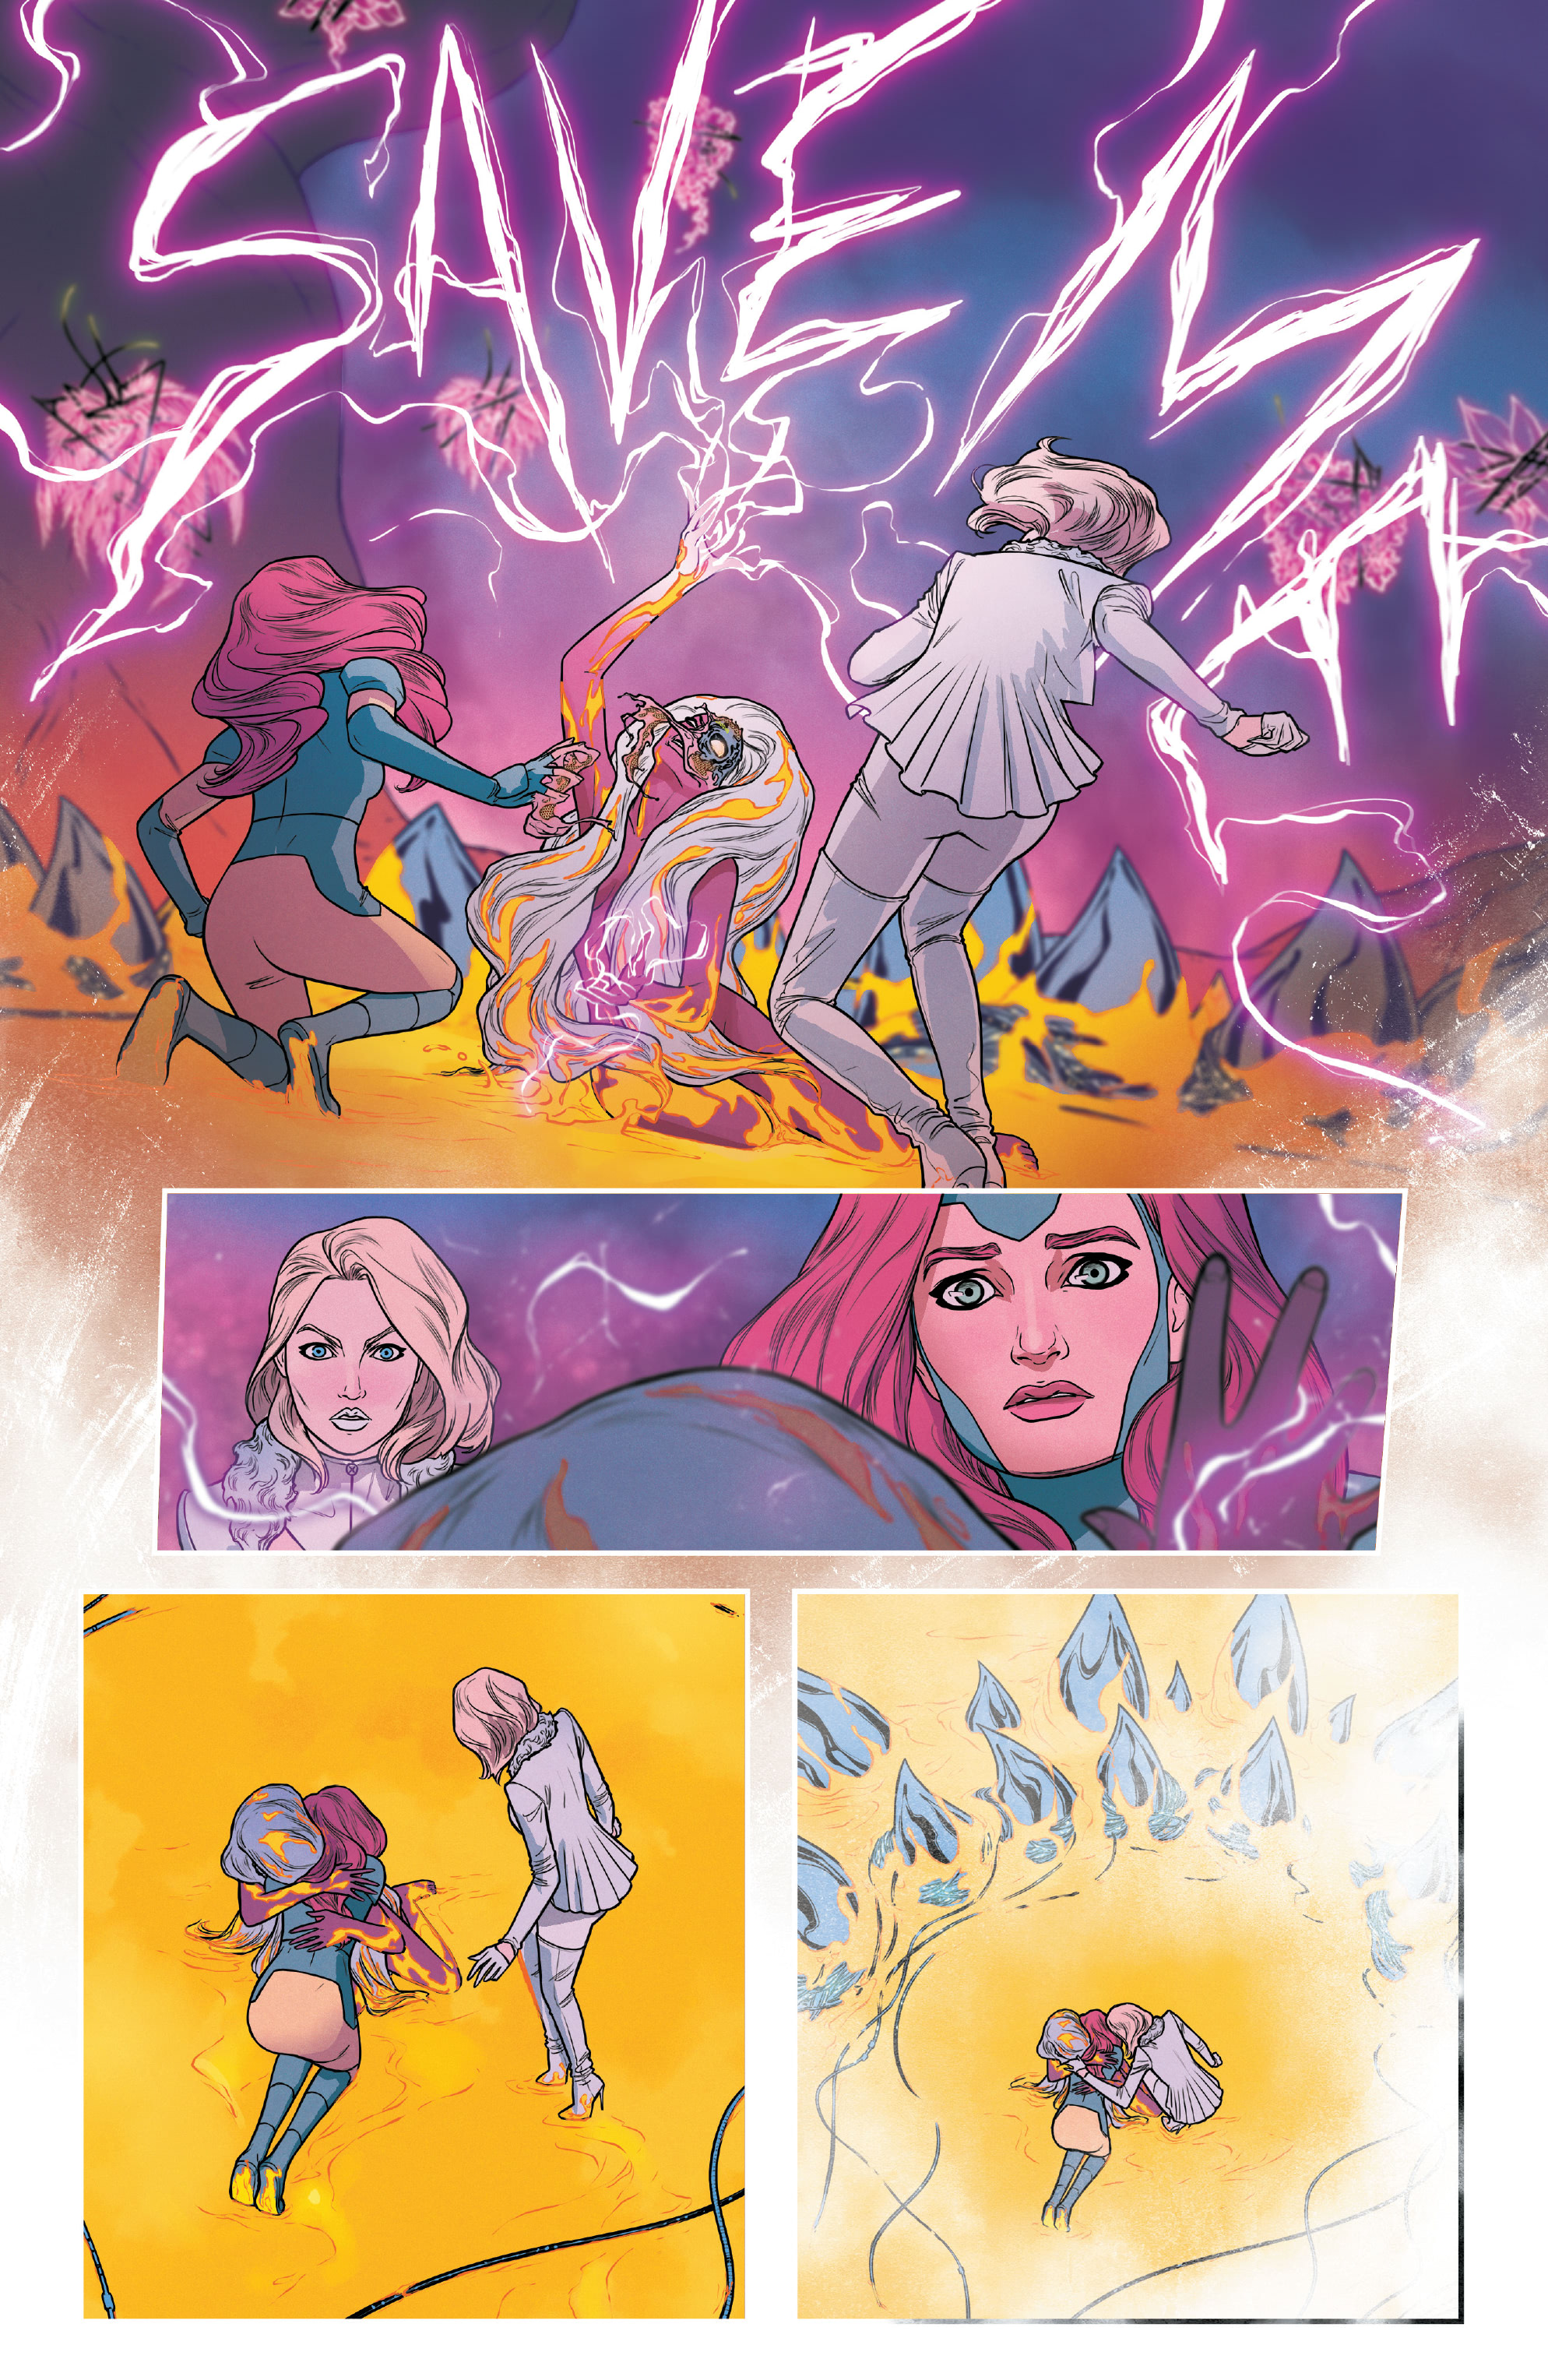 Giant-Size X-Men: Jean Grey And Emma Frost (2020) #1. 